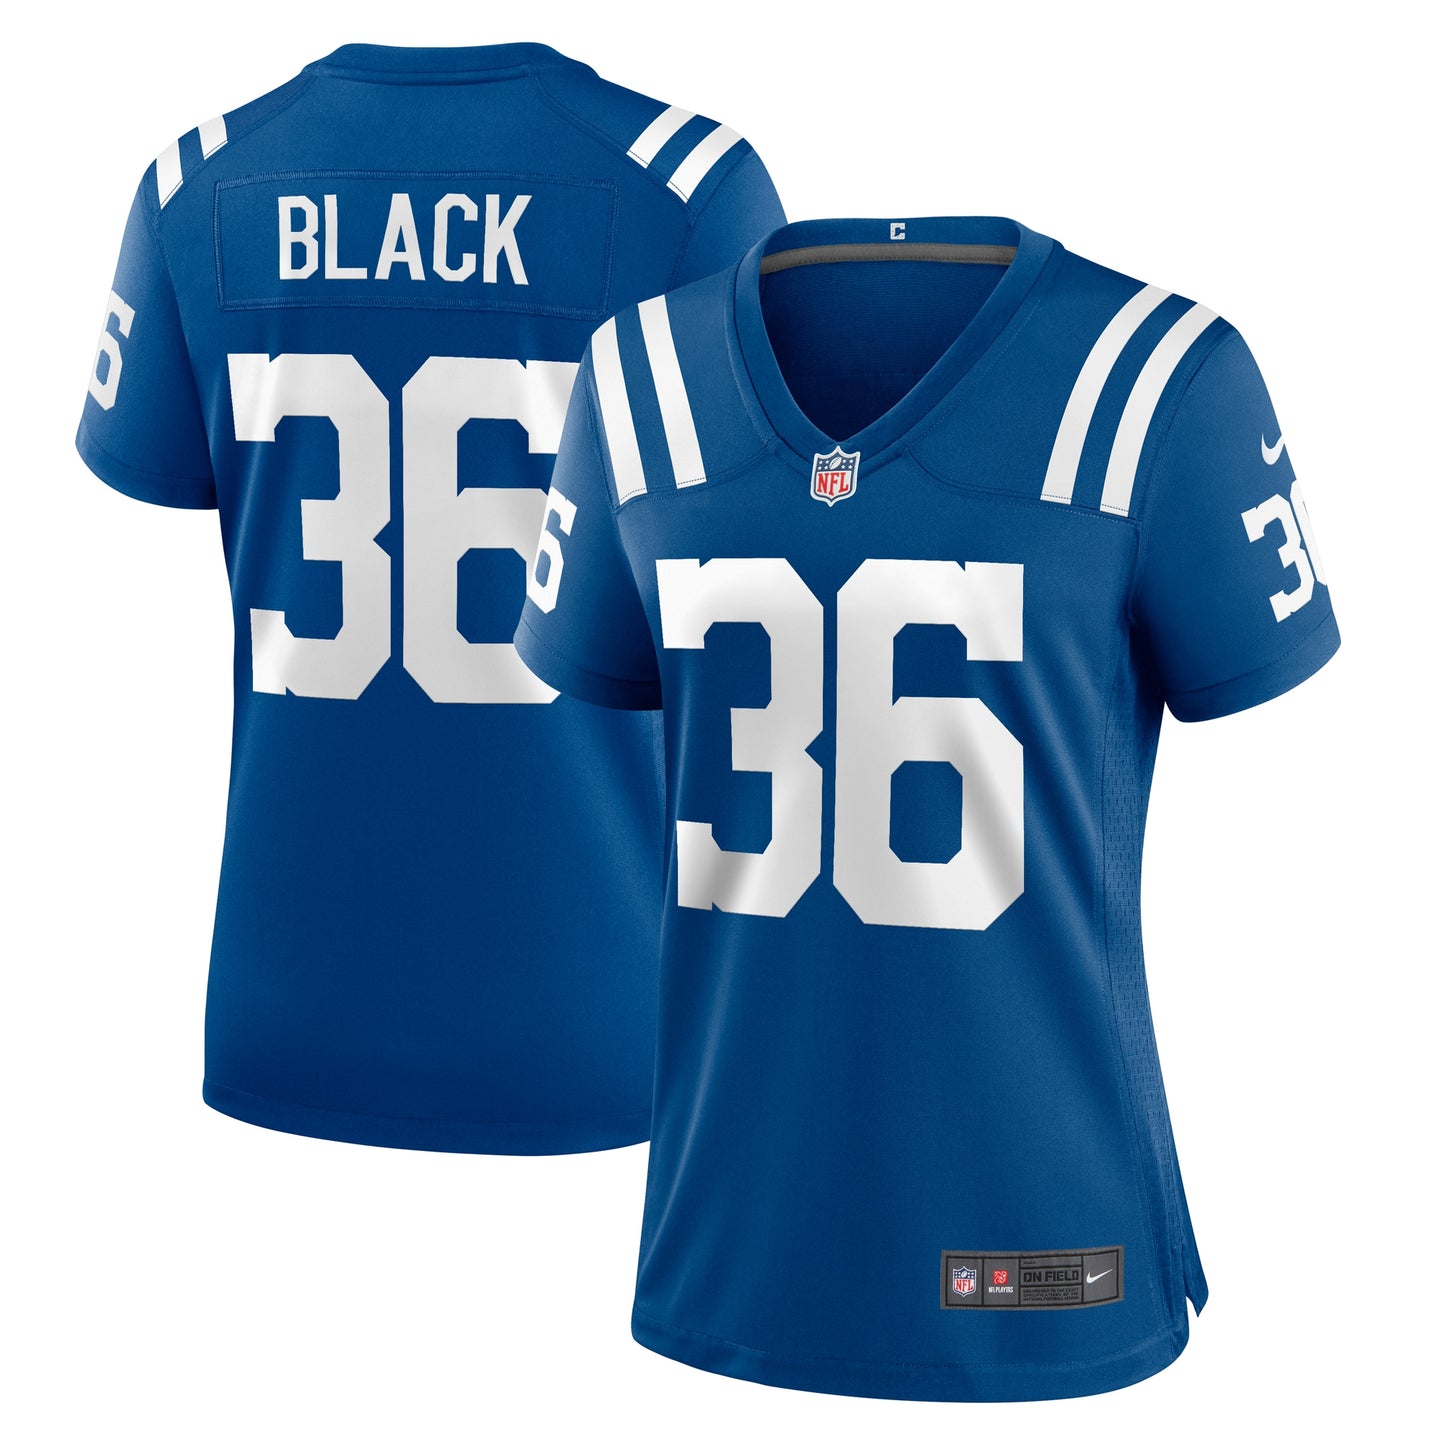 Henry Black Indianapolis Colts Nike Women's Team Game Jersey - Royal